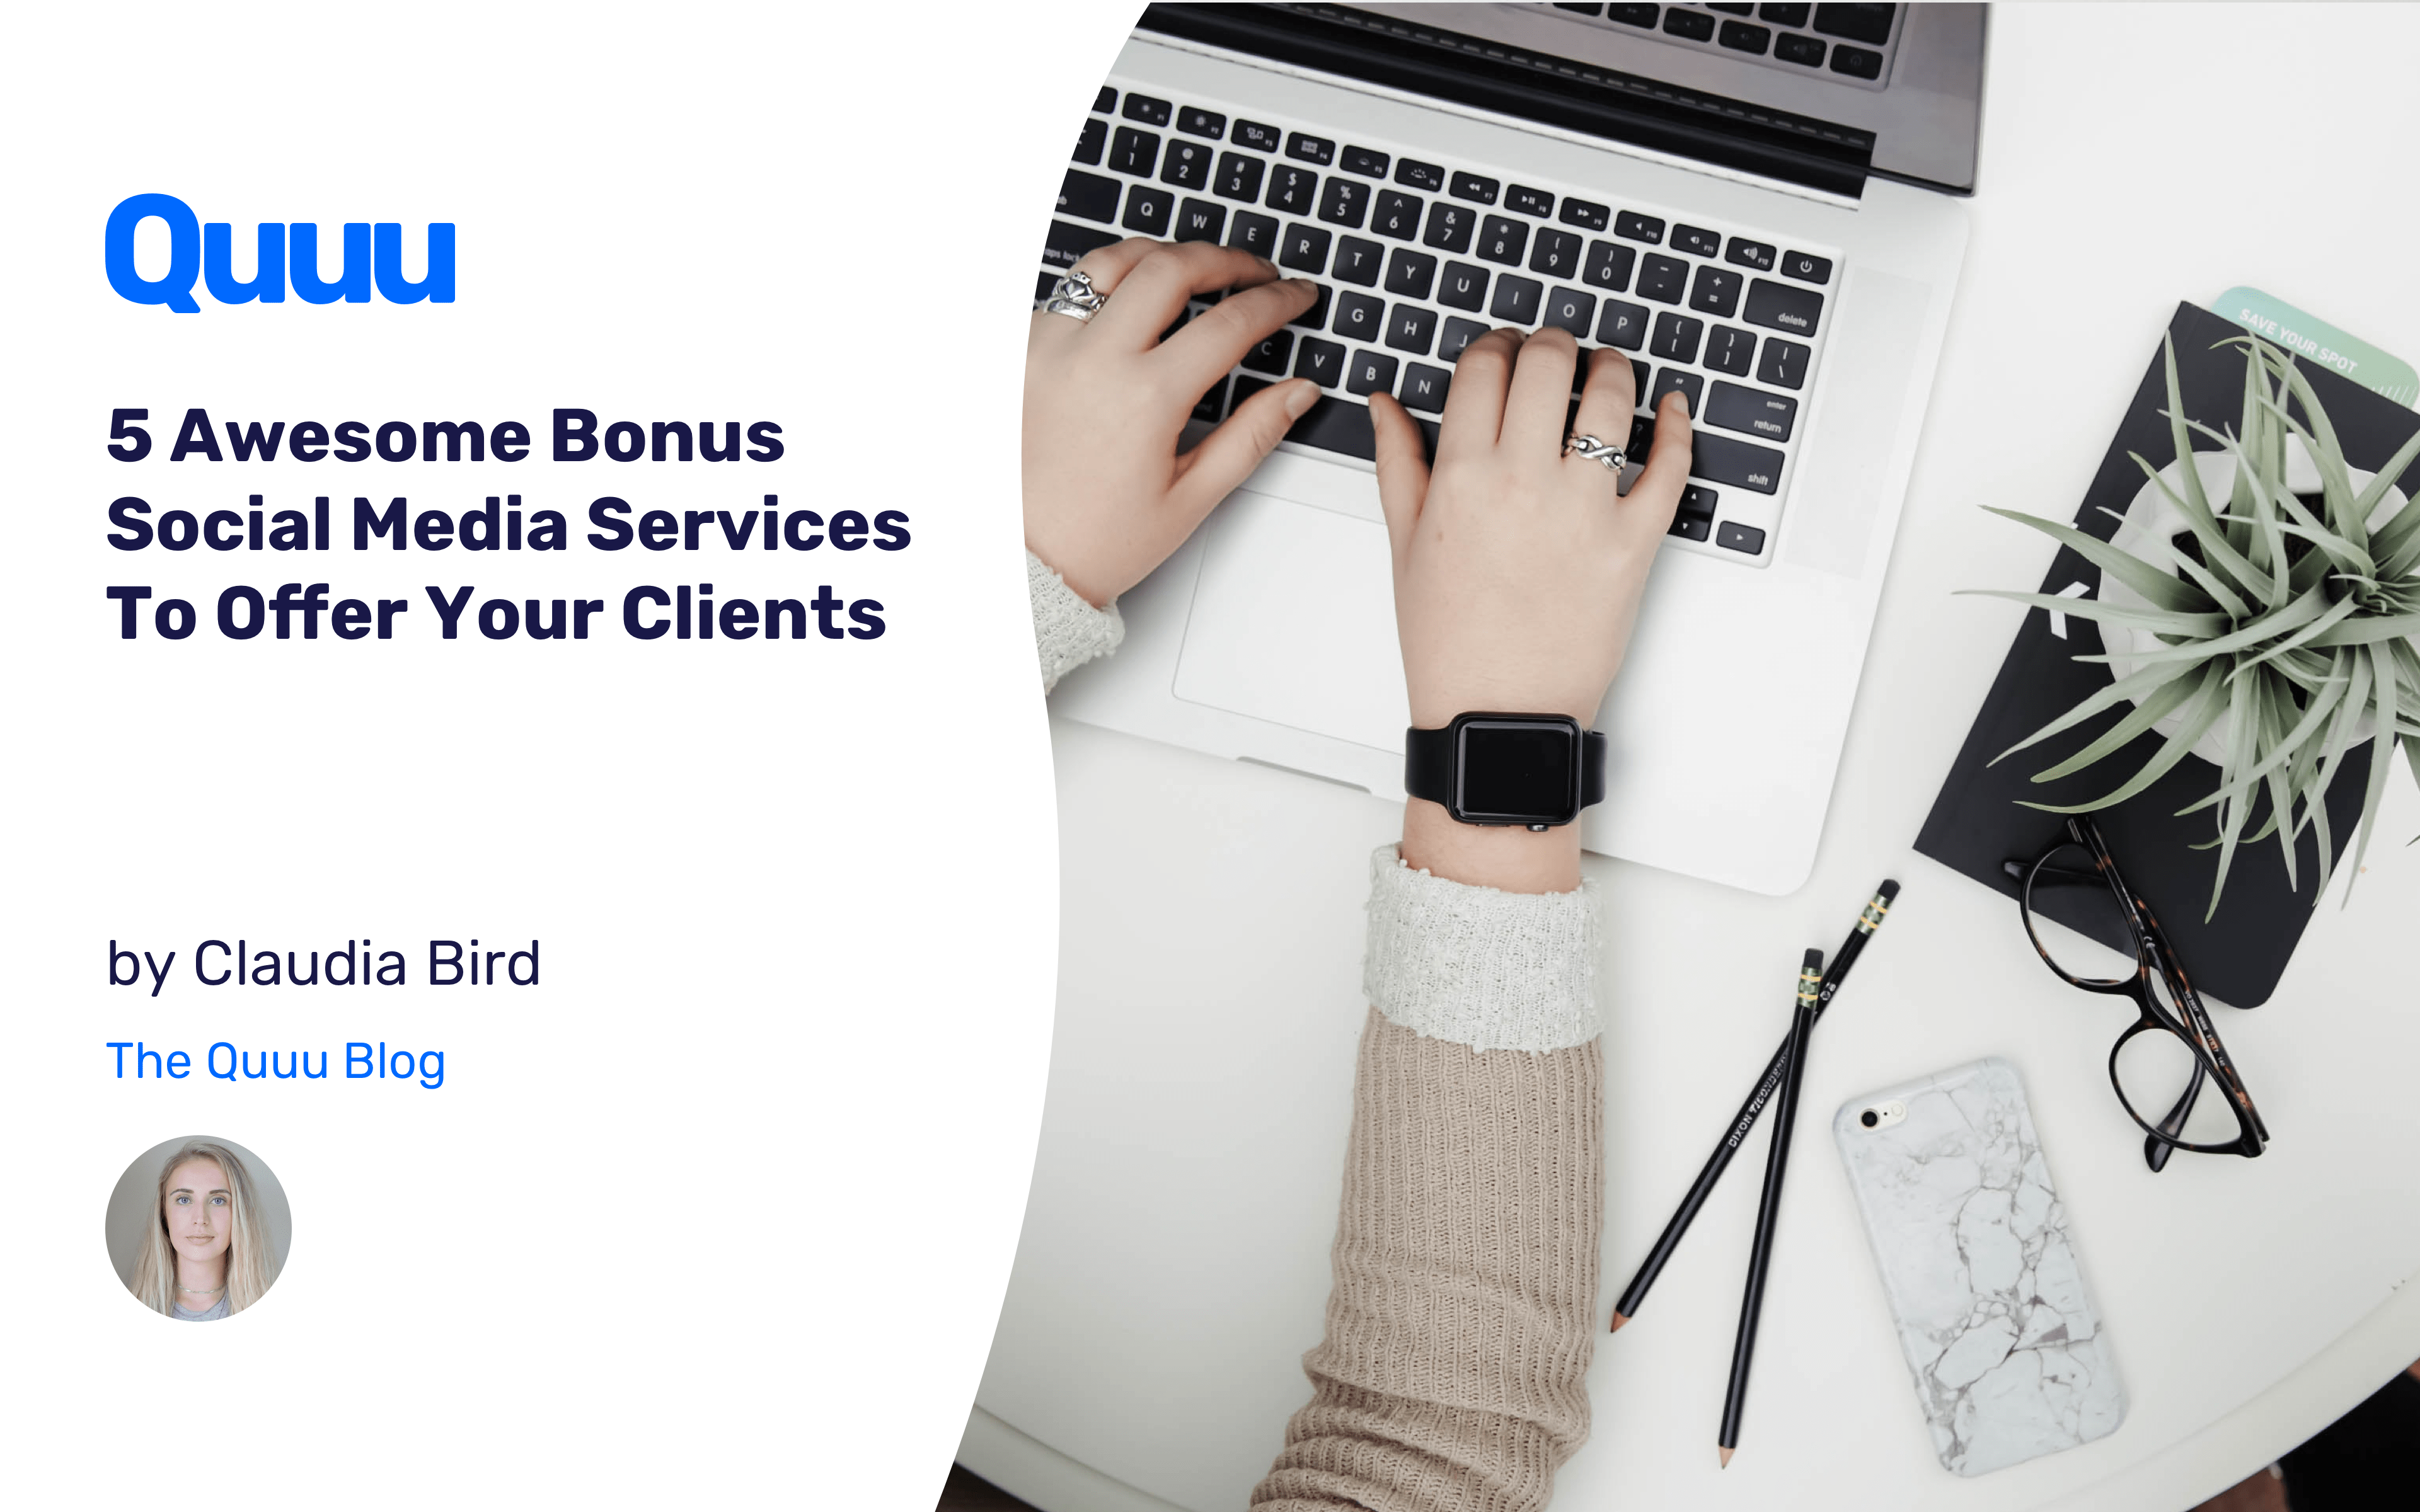 5 Awesome Bonus Social Media Services To Offer Your Clients